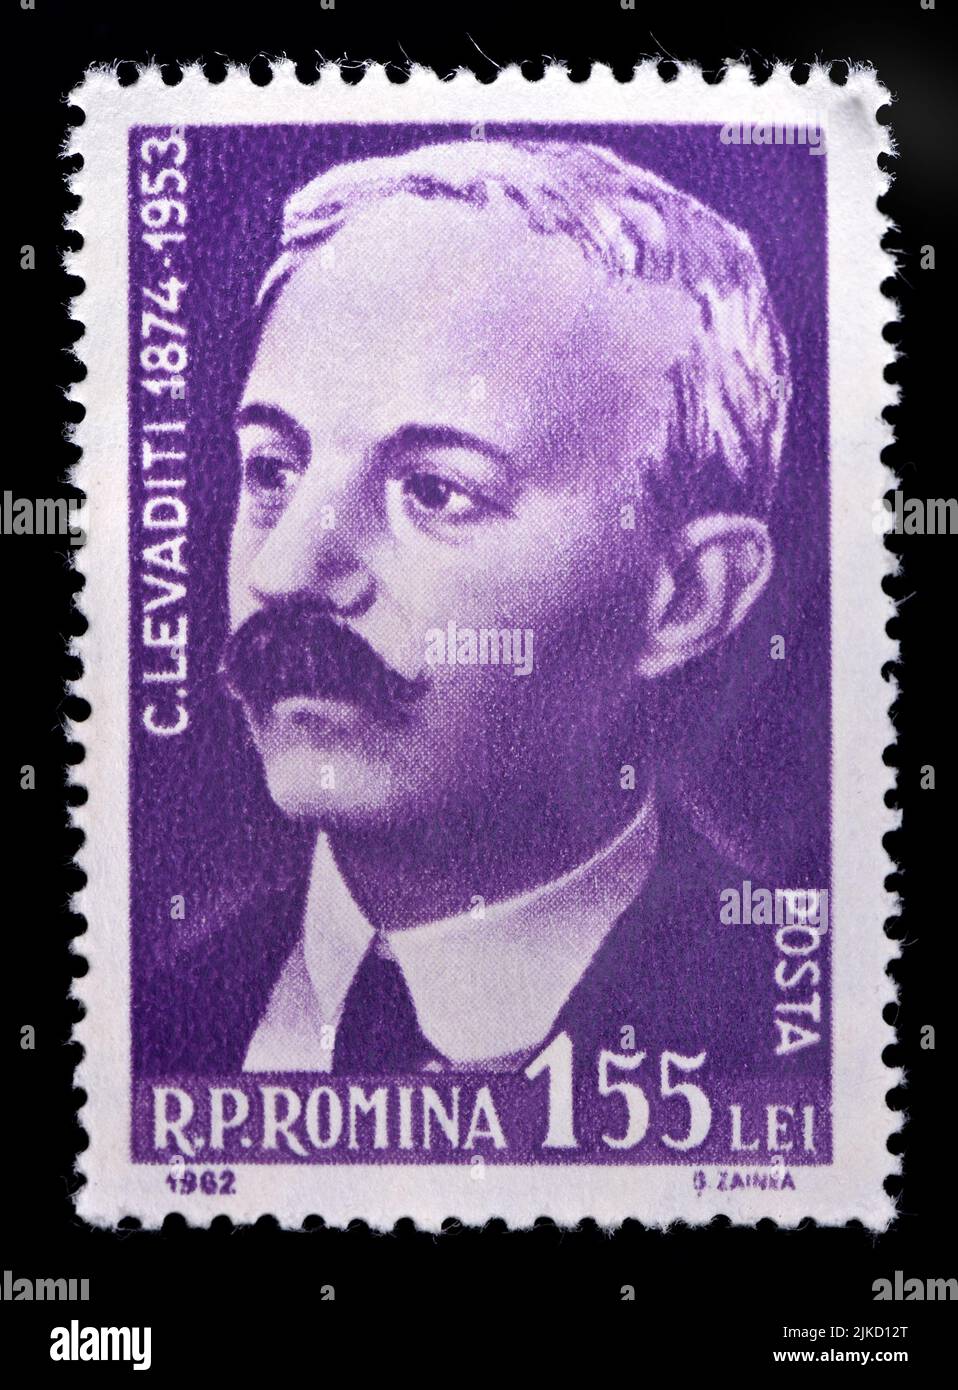 Romanian postage stamp (1962) : Constantin Levaditi (1874-1953) Romanian physician and microbiologist Stock Photo